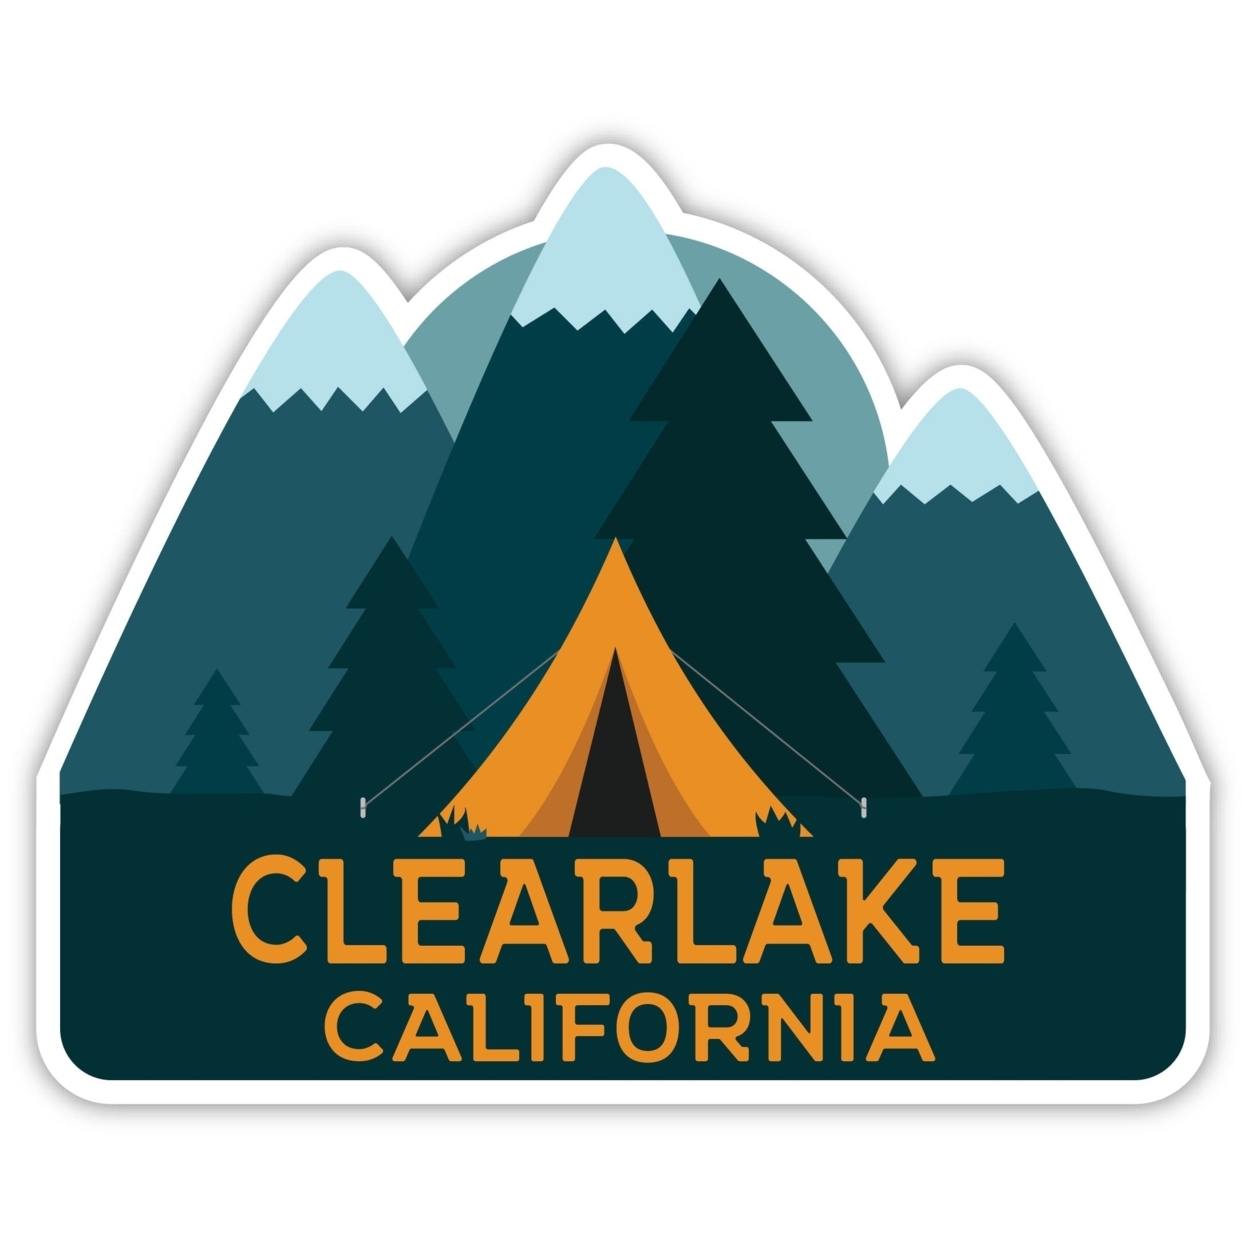 Clearlake California Souvenir Decorative Stickers (Choose Theme And Size) - 4-Pack, 4-Inch, Tent